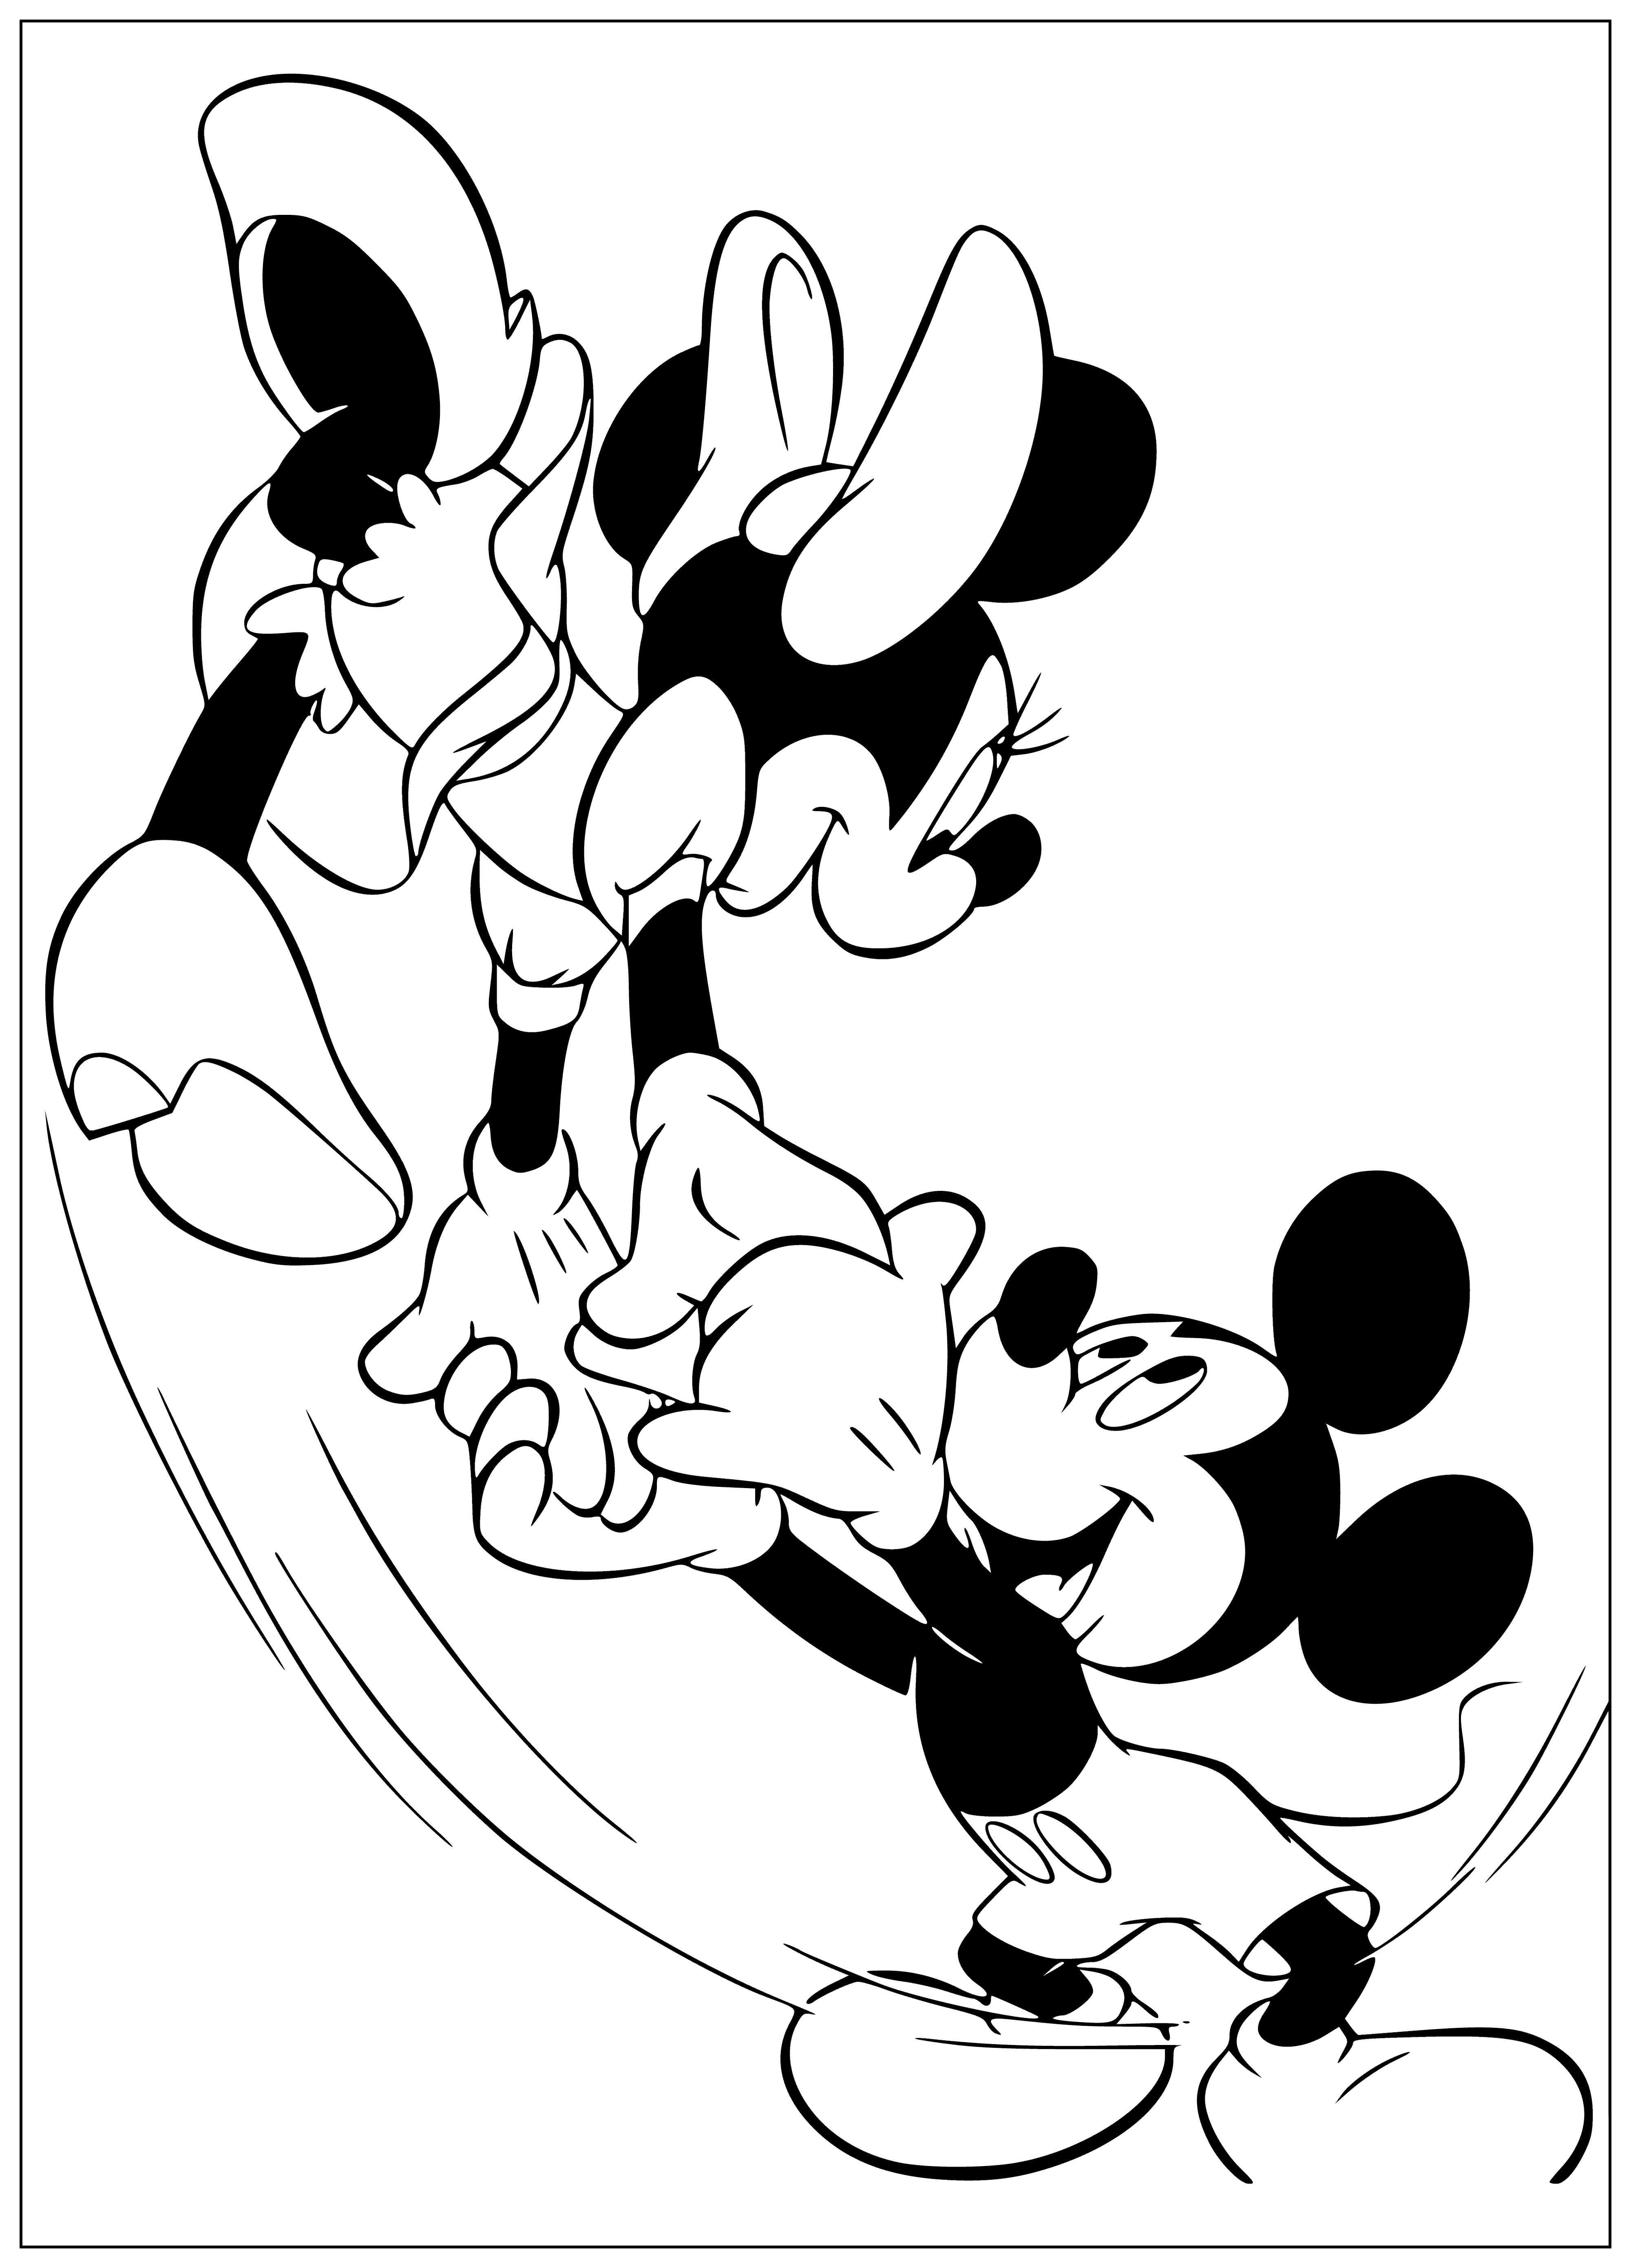 Dancing coloring page